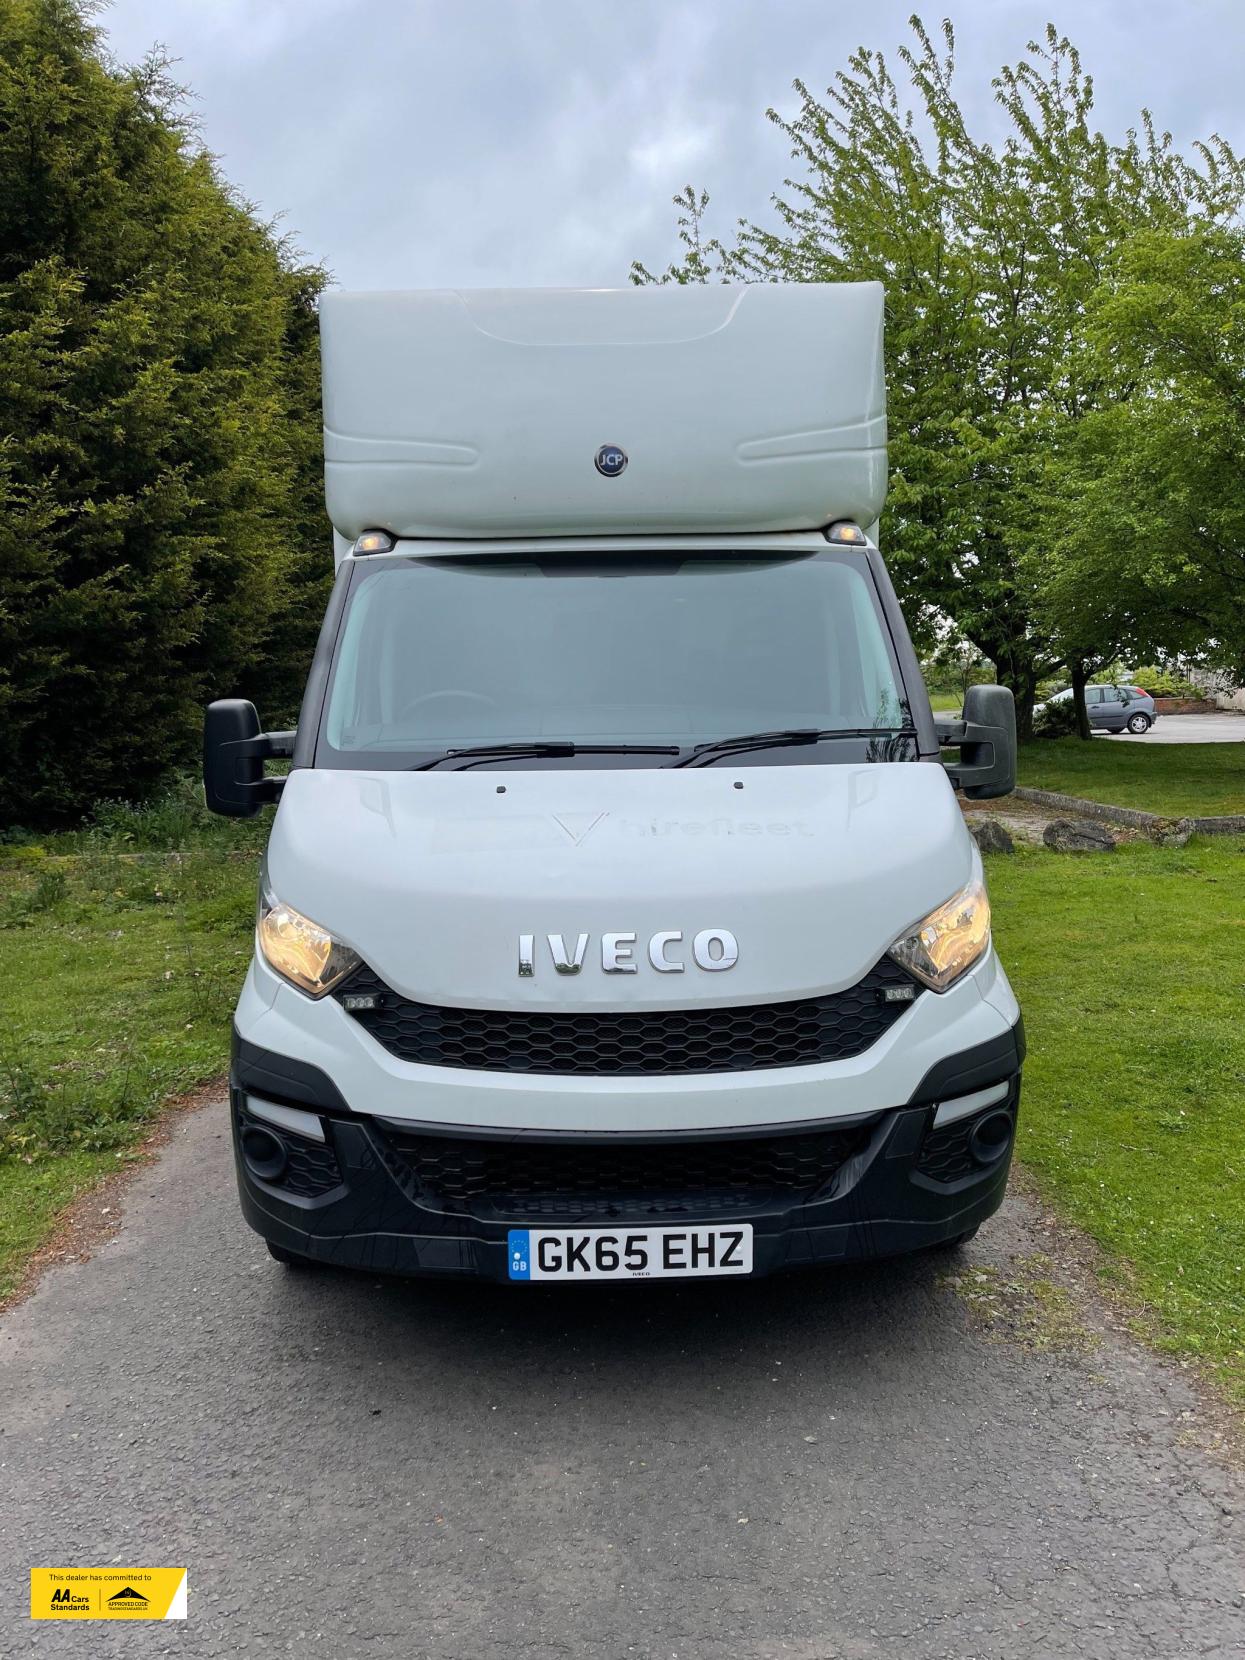 IVECO Daily 2.3 LUTON VAN WITH TAIL LIFT 3.5T